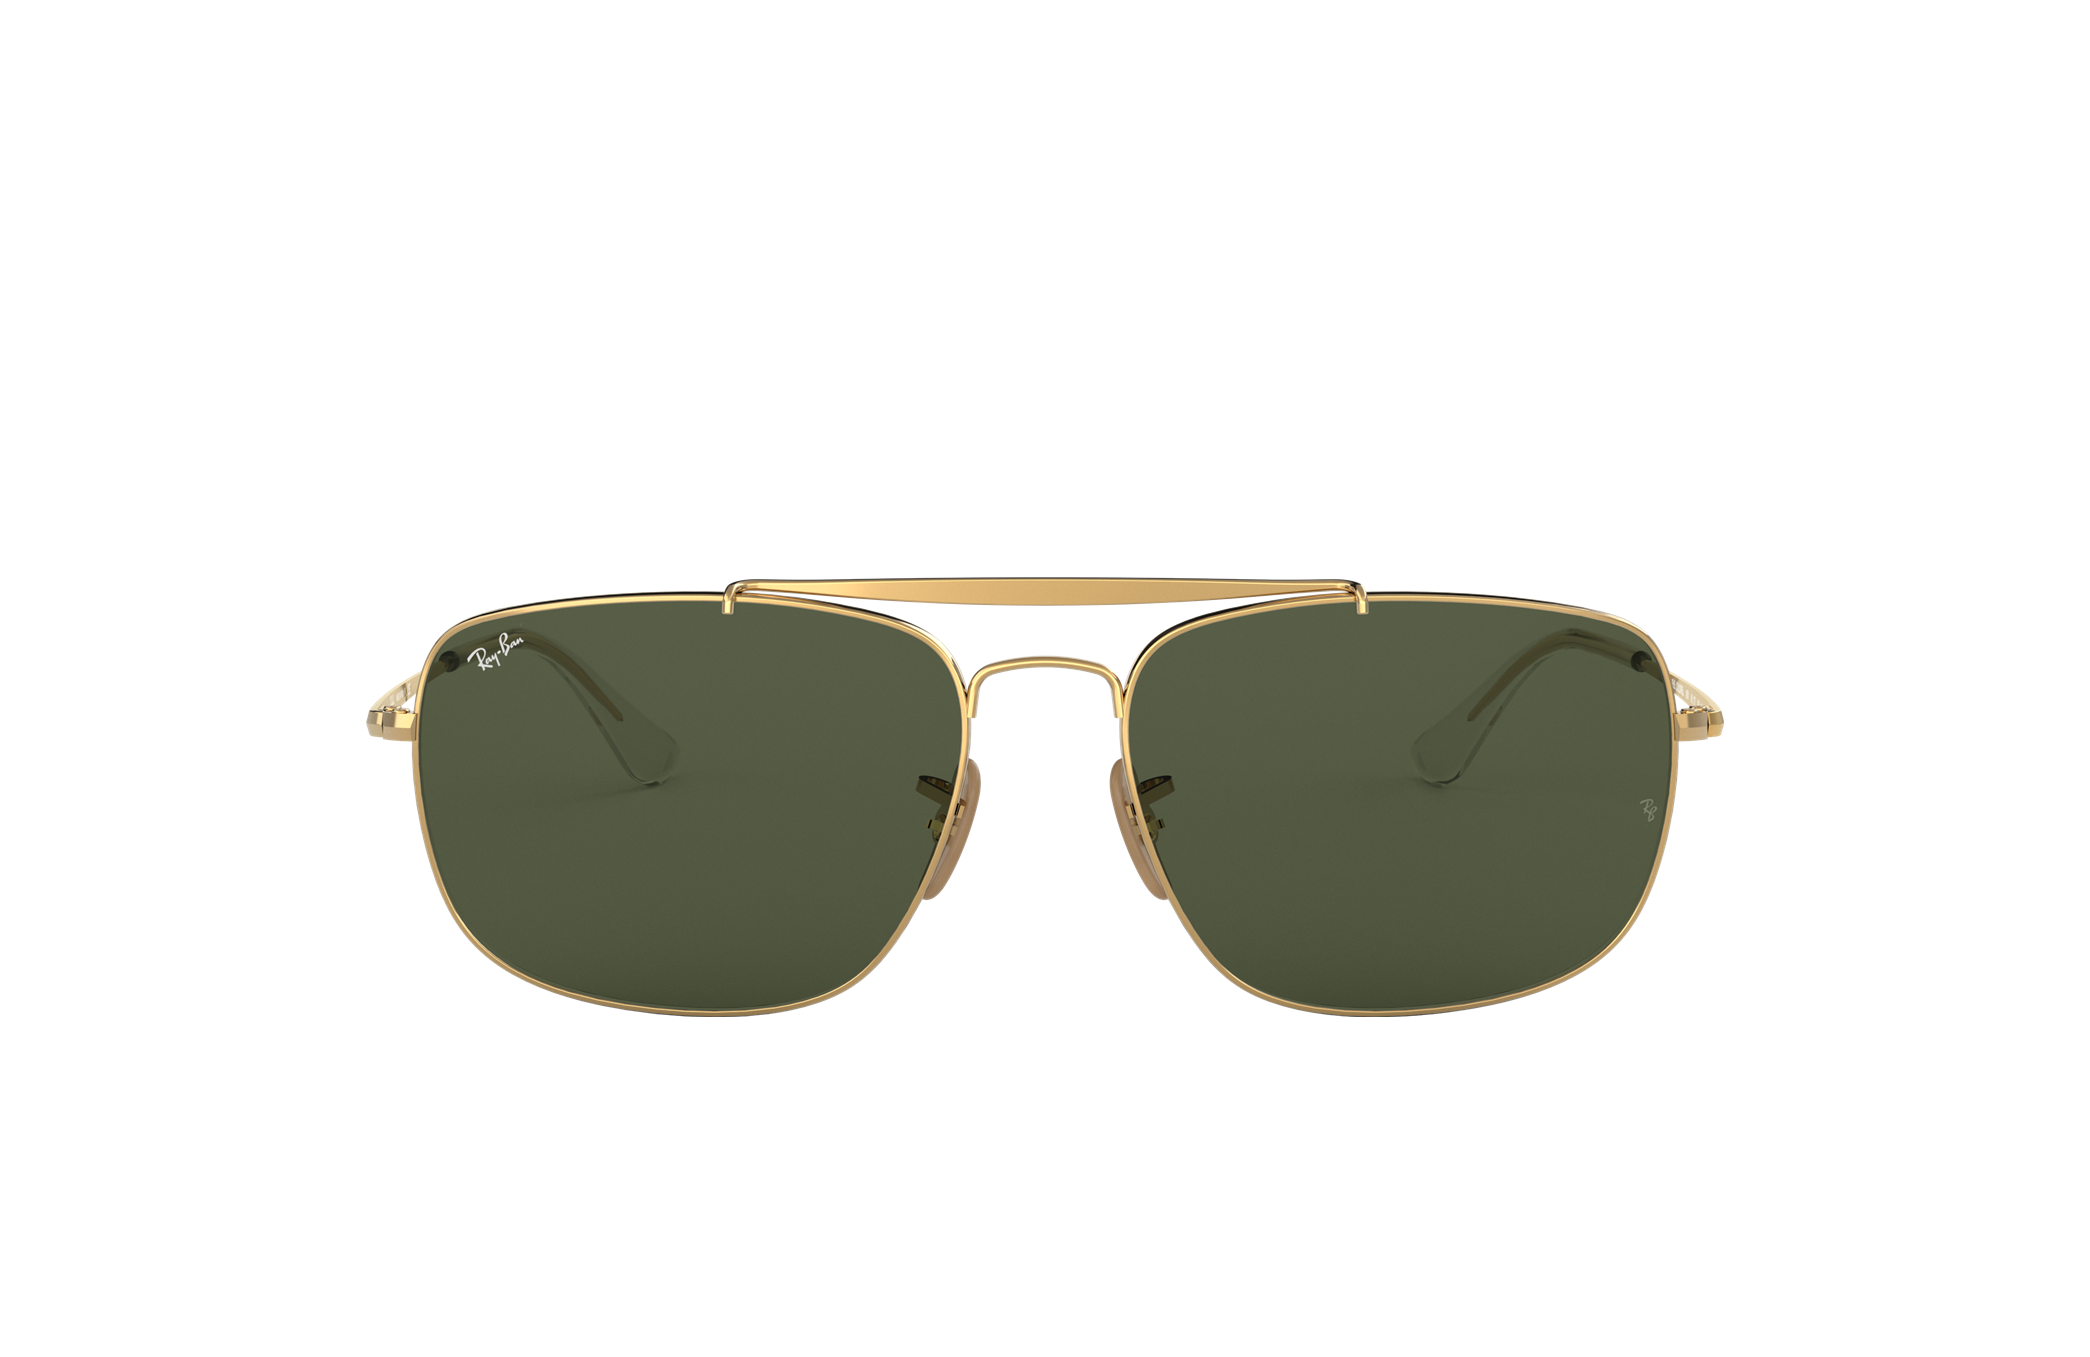 ray ban colonel gold